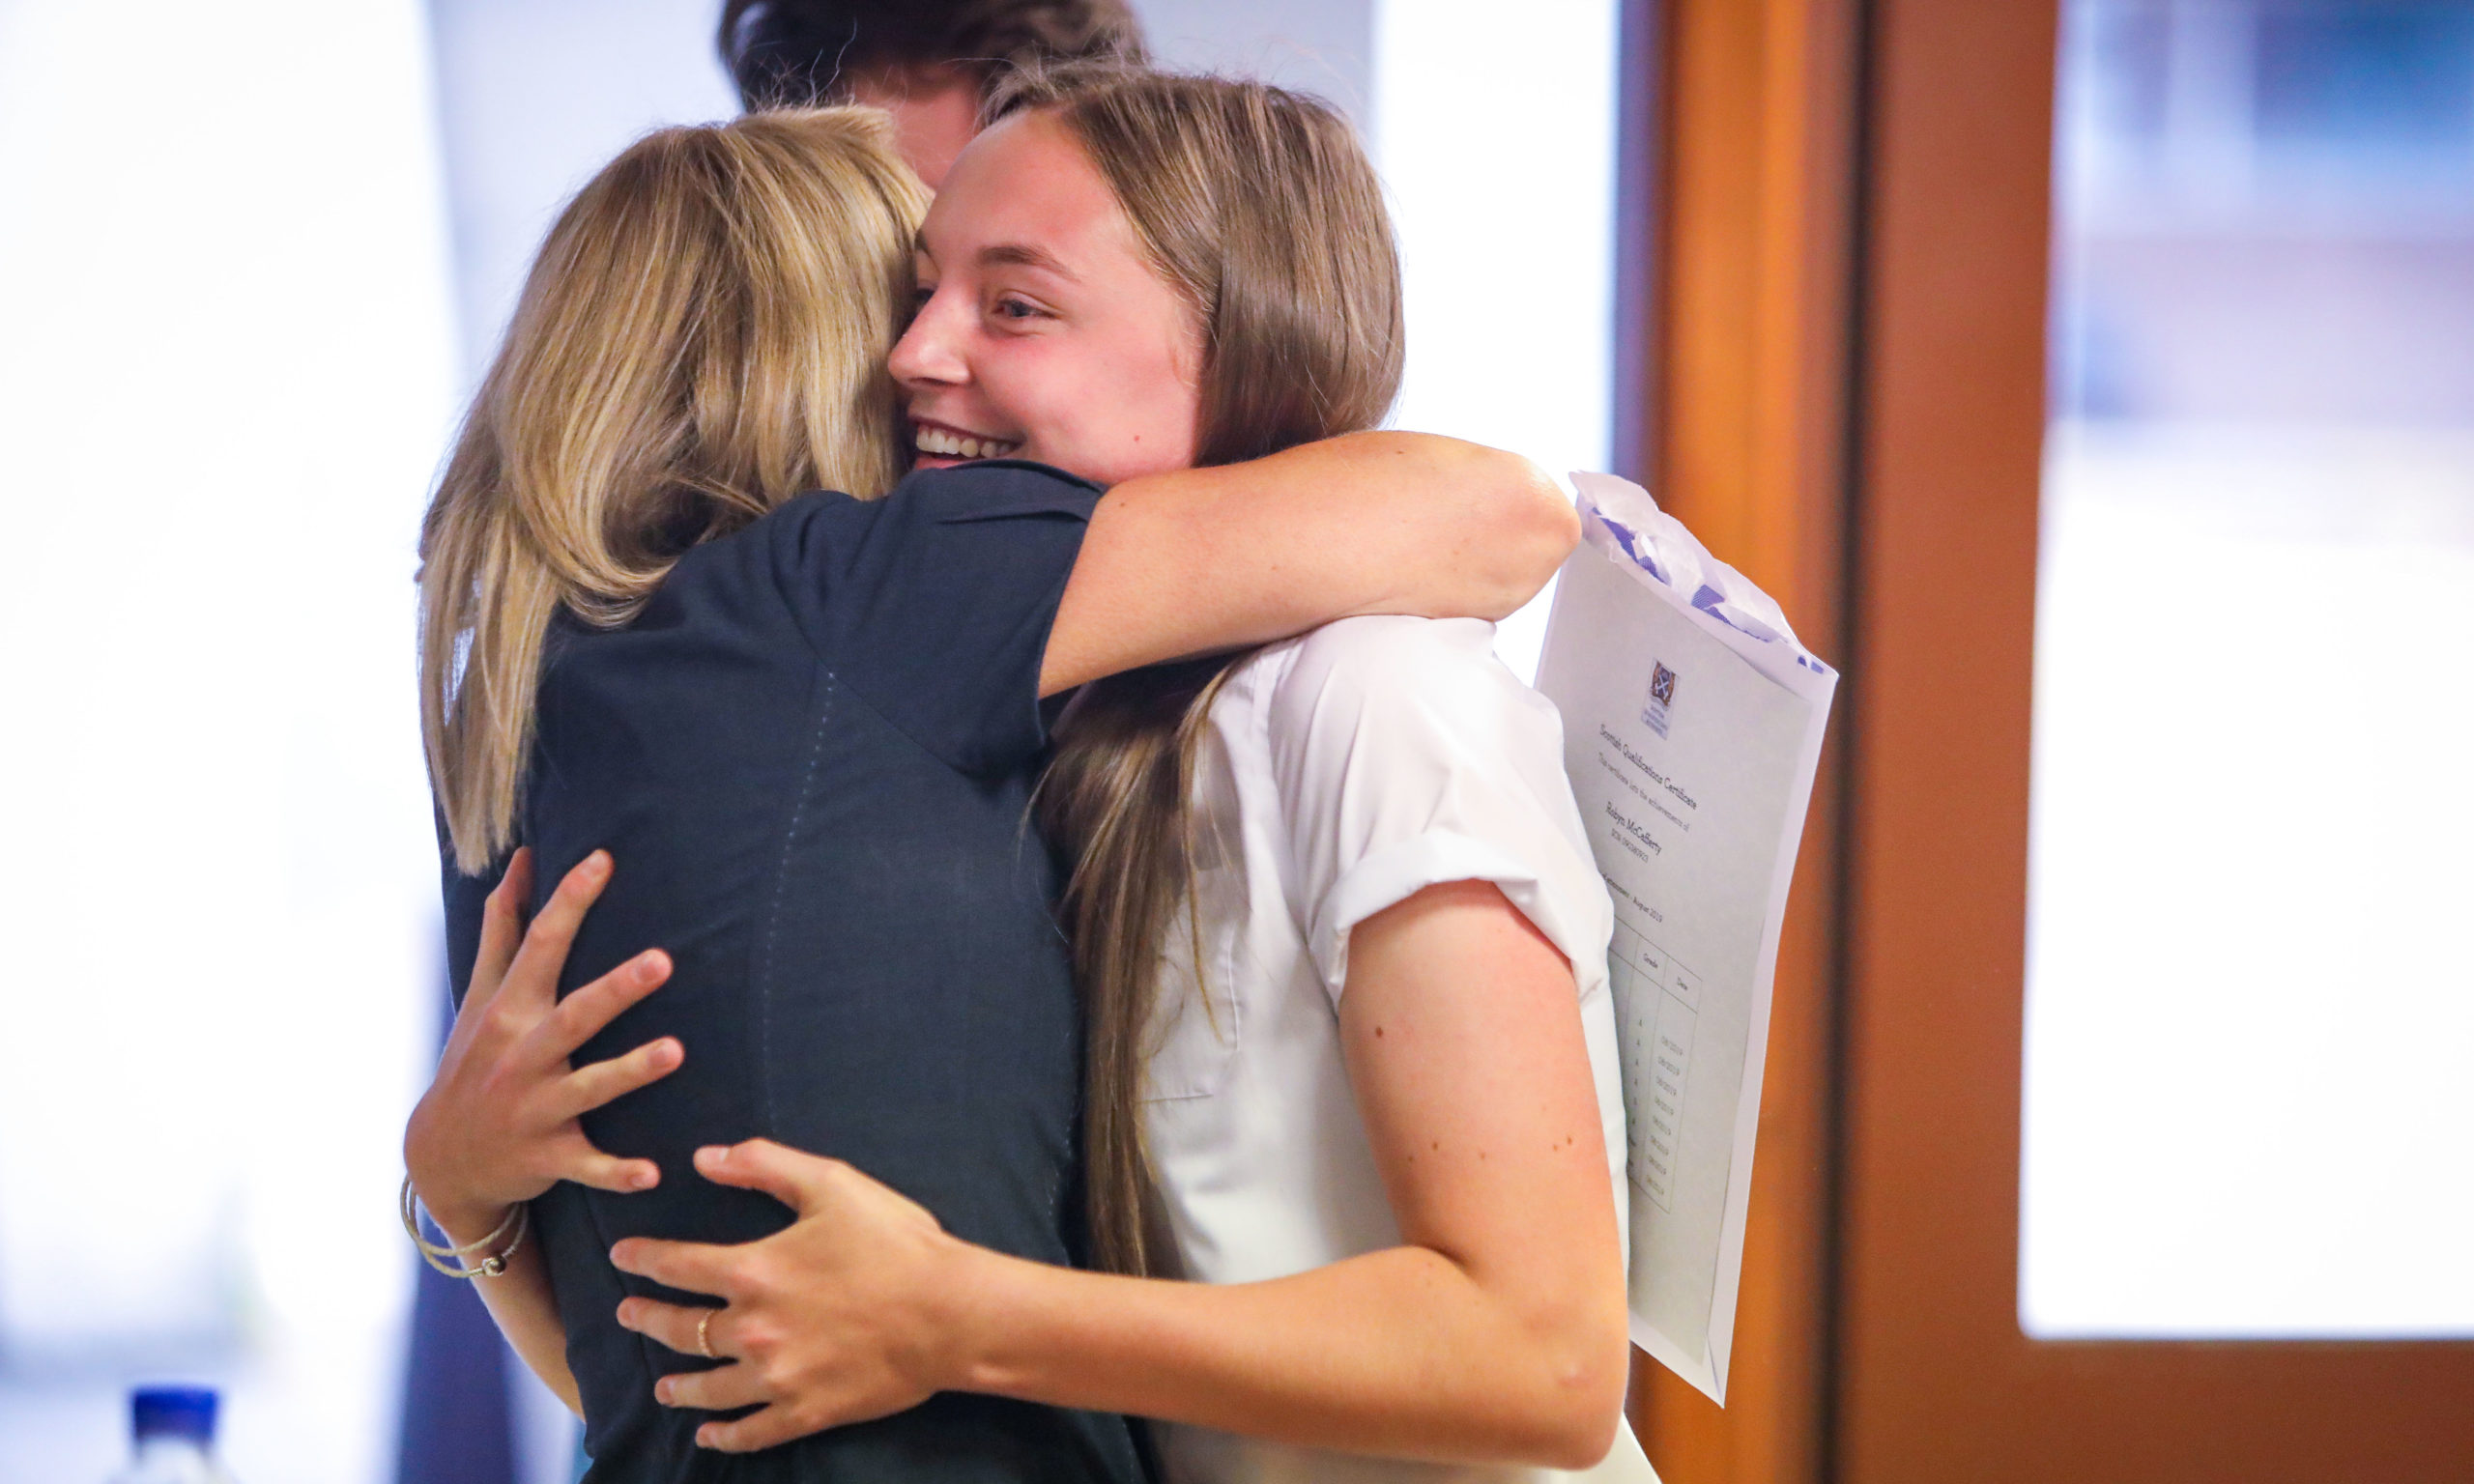 More than 136,000 candidates completed SQA exams, courses and awards last year. Robyn McCafferty, at Woodmill High School, Dunfermline got a congratulatory hug from her mum after receiving her results.